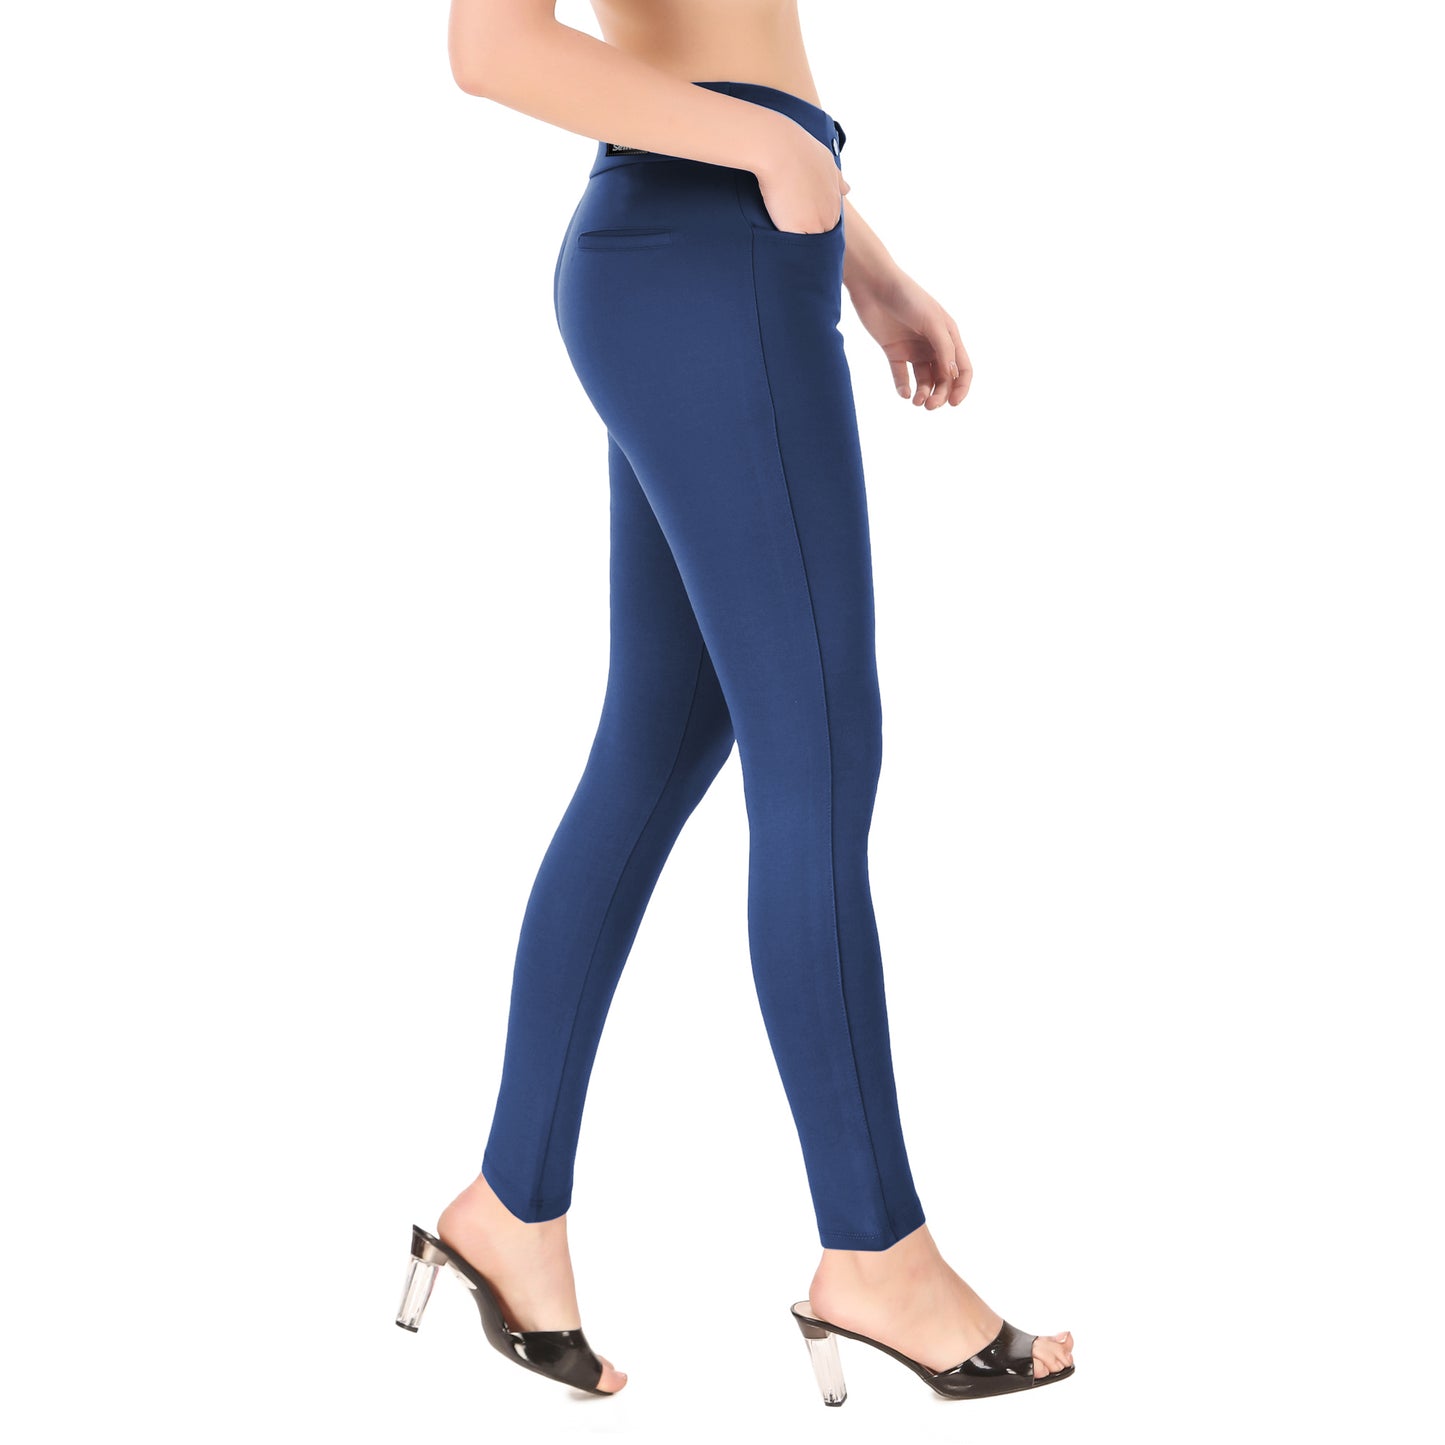 Most Comfortable Women's Mid-Waist Jeggings with 2 Front Pockets - Royal Blue